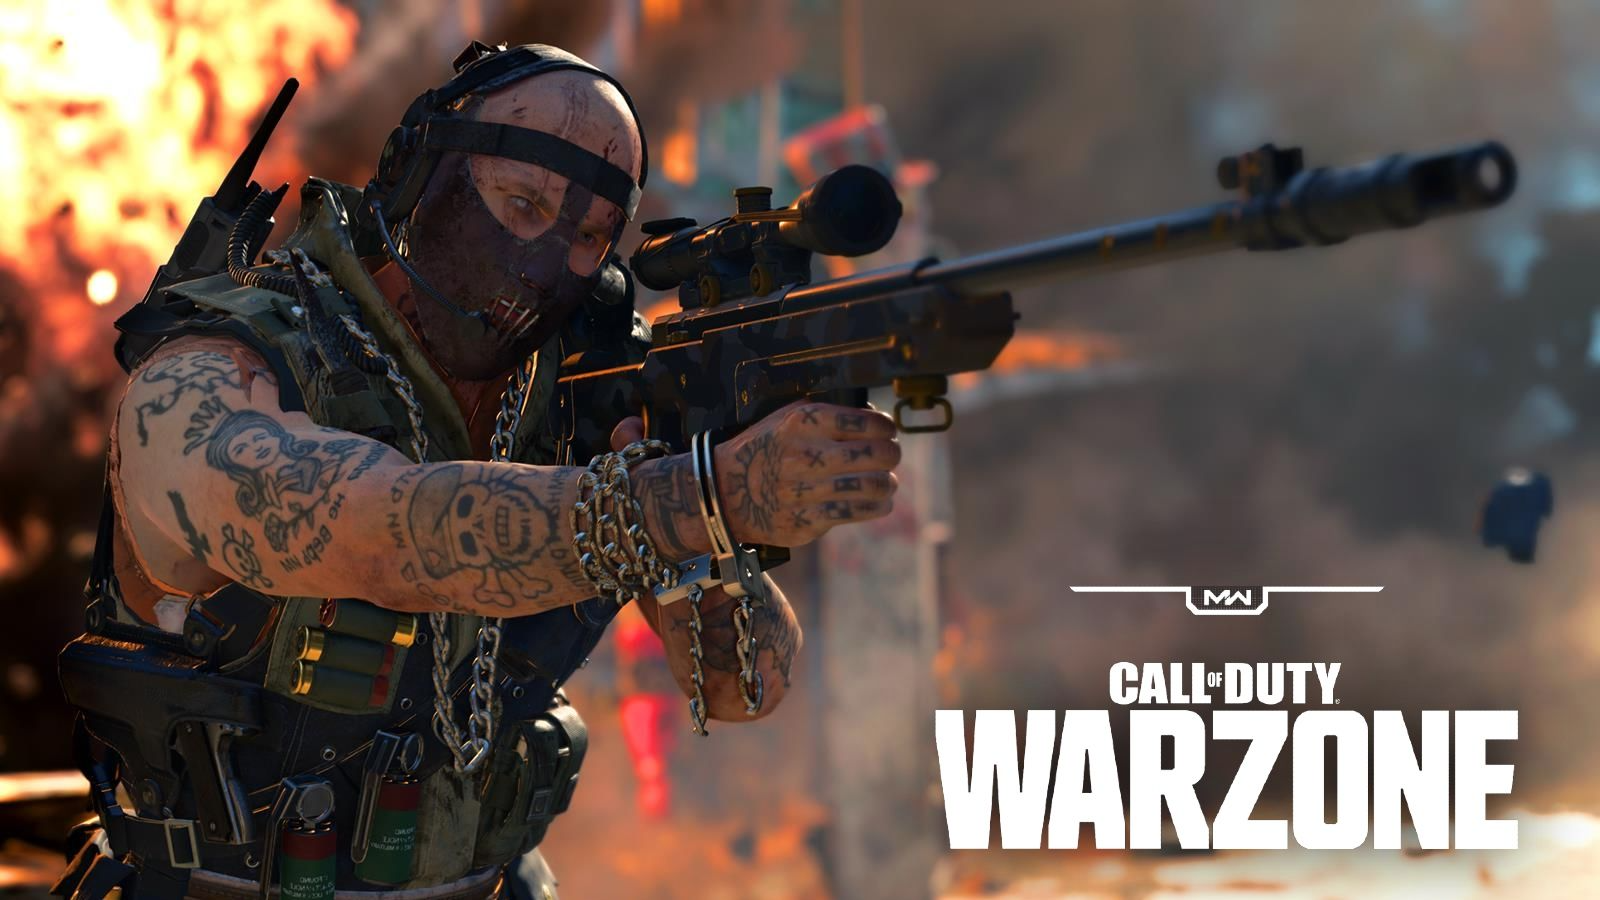 MW2 Warzone 2 DOWNLOAD (Be Fast) - How to Download Call of Duty